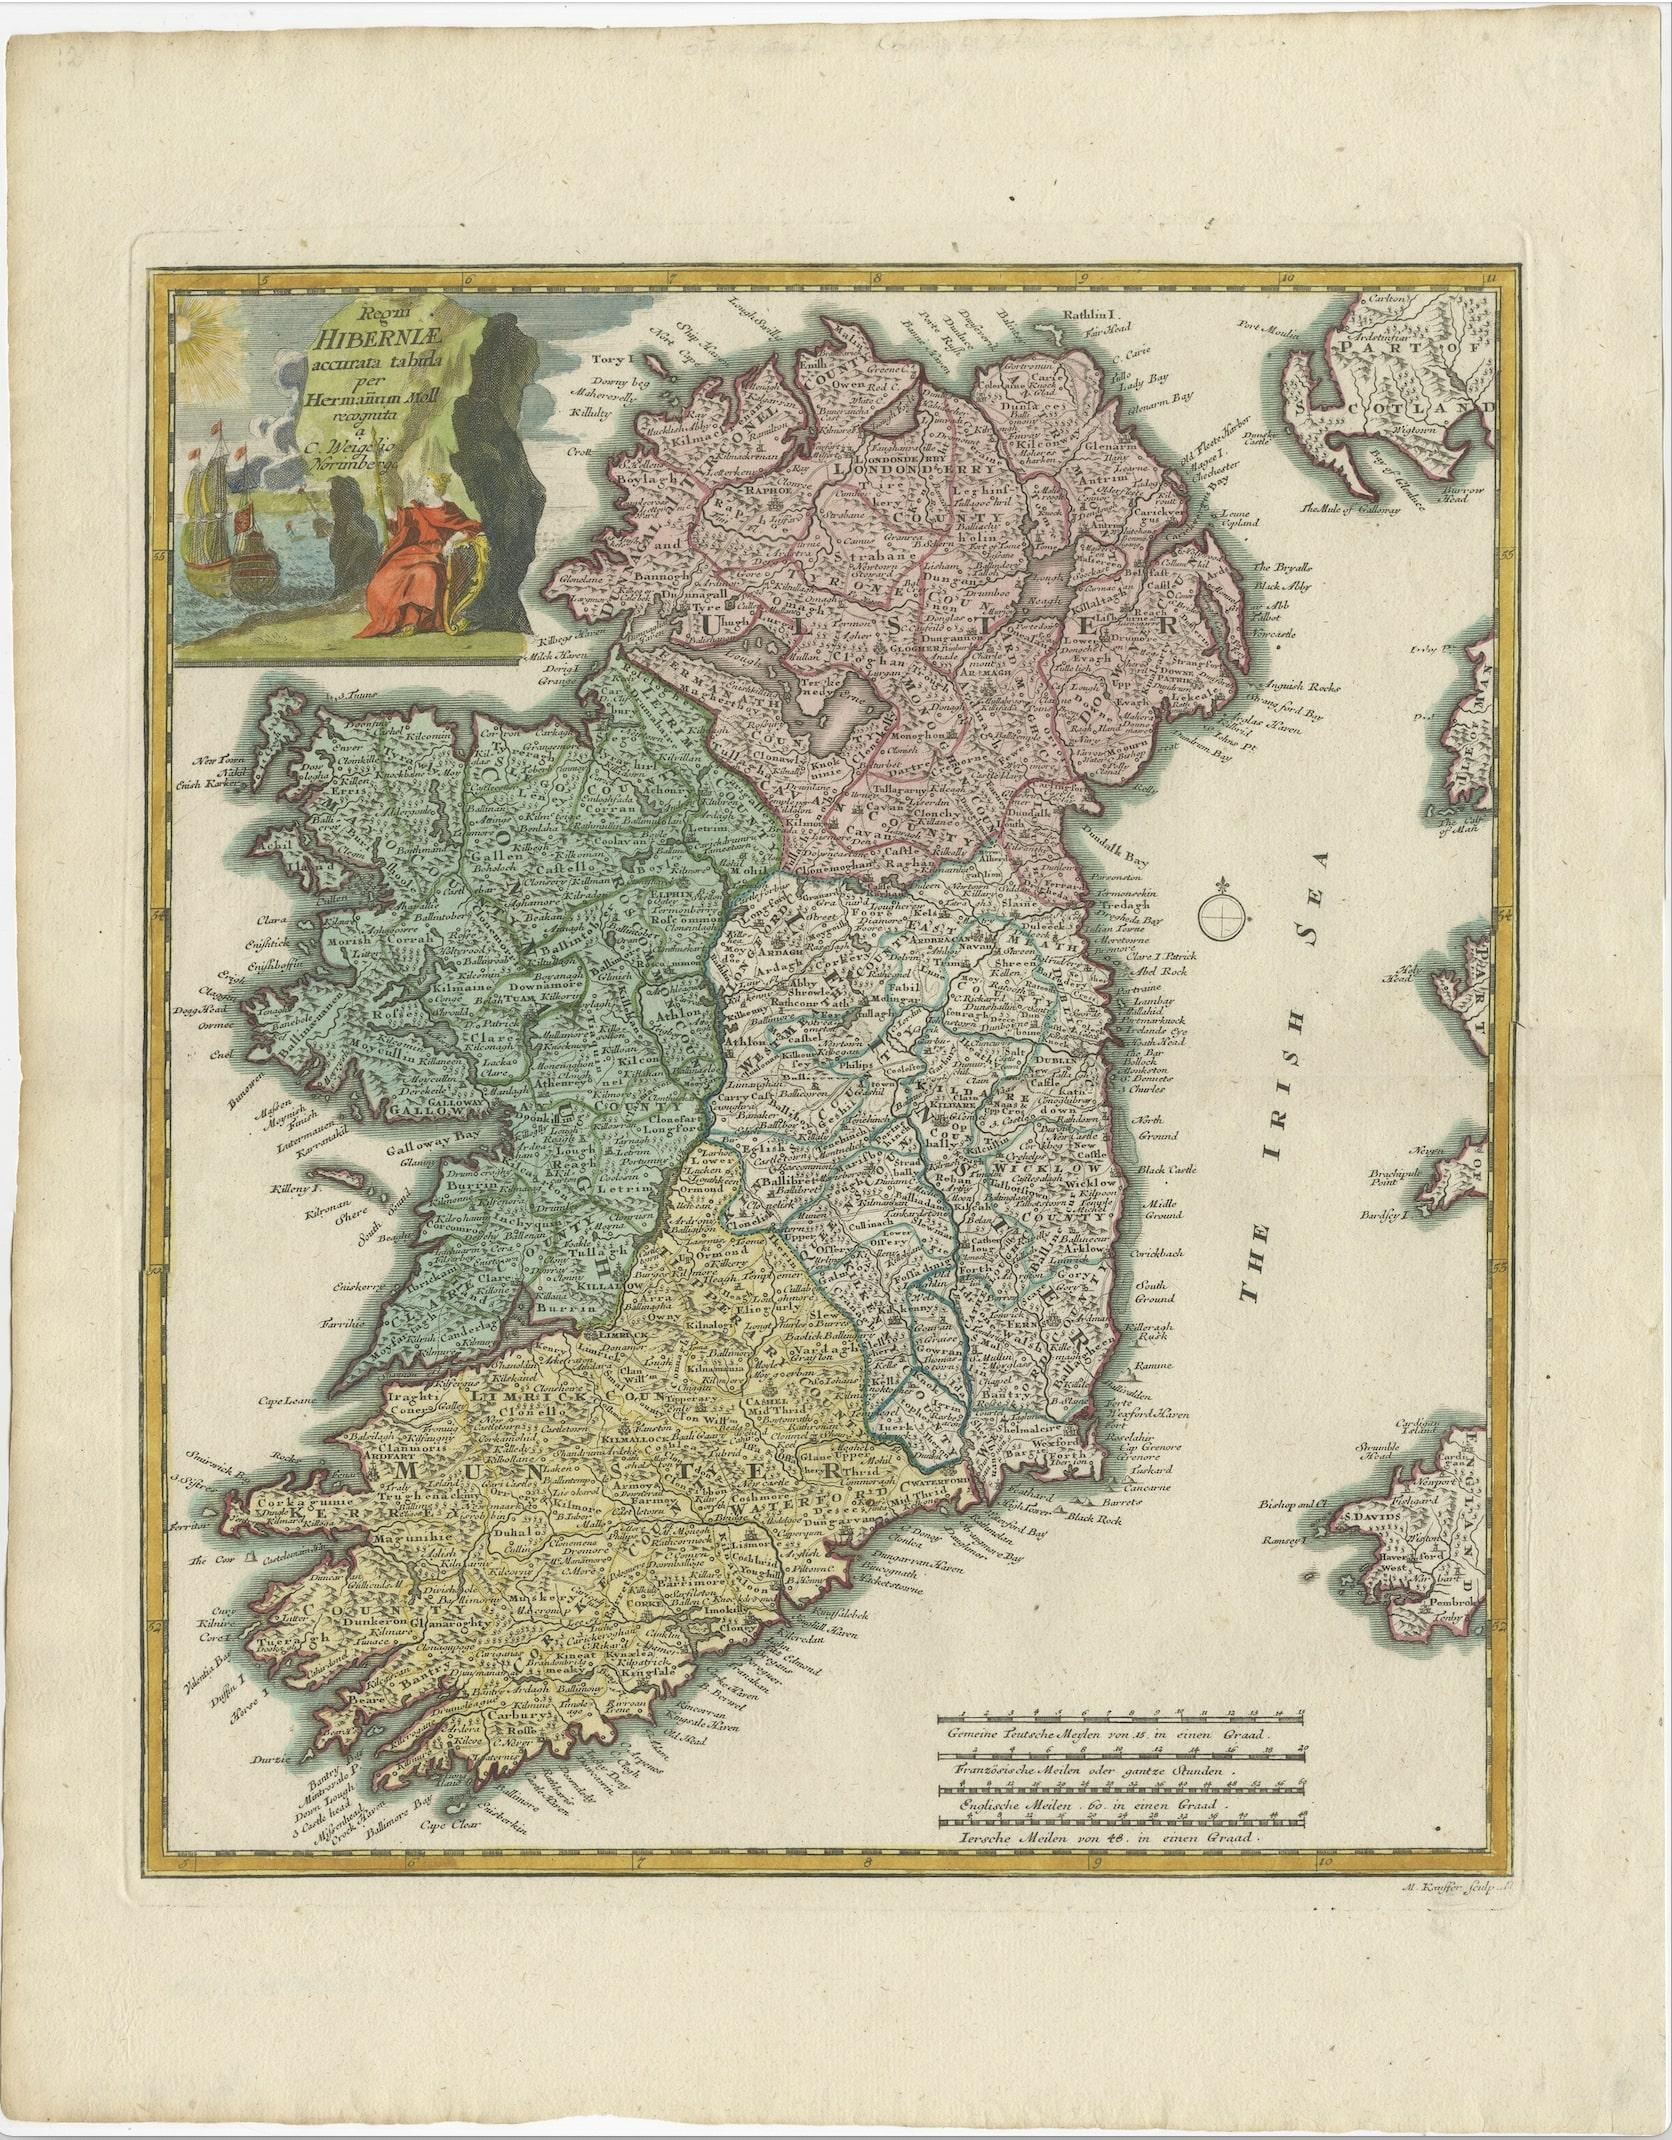 Title: Regni Hiberniae Accurata Tabula per Hermanum Moll 

Decorative map of the four Irish provinces, Ireland, 1718, by Christoph Weigel (with credit to Herman Moll), engraved by Michael Kauffer. Old colouring.

Johann Christoph Weigel, known as